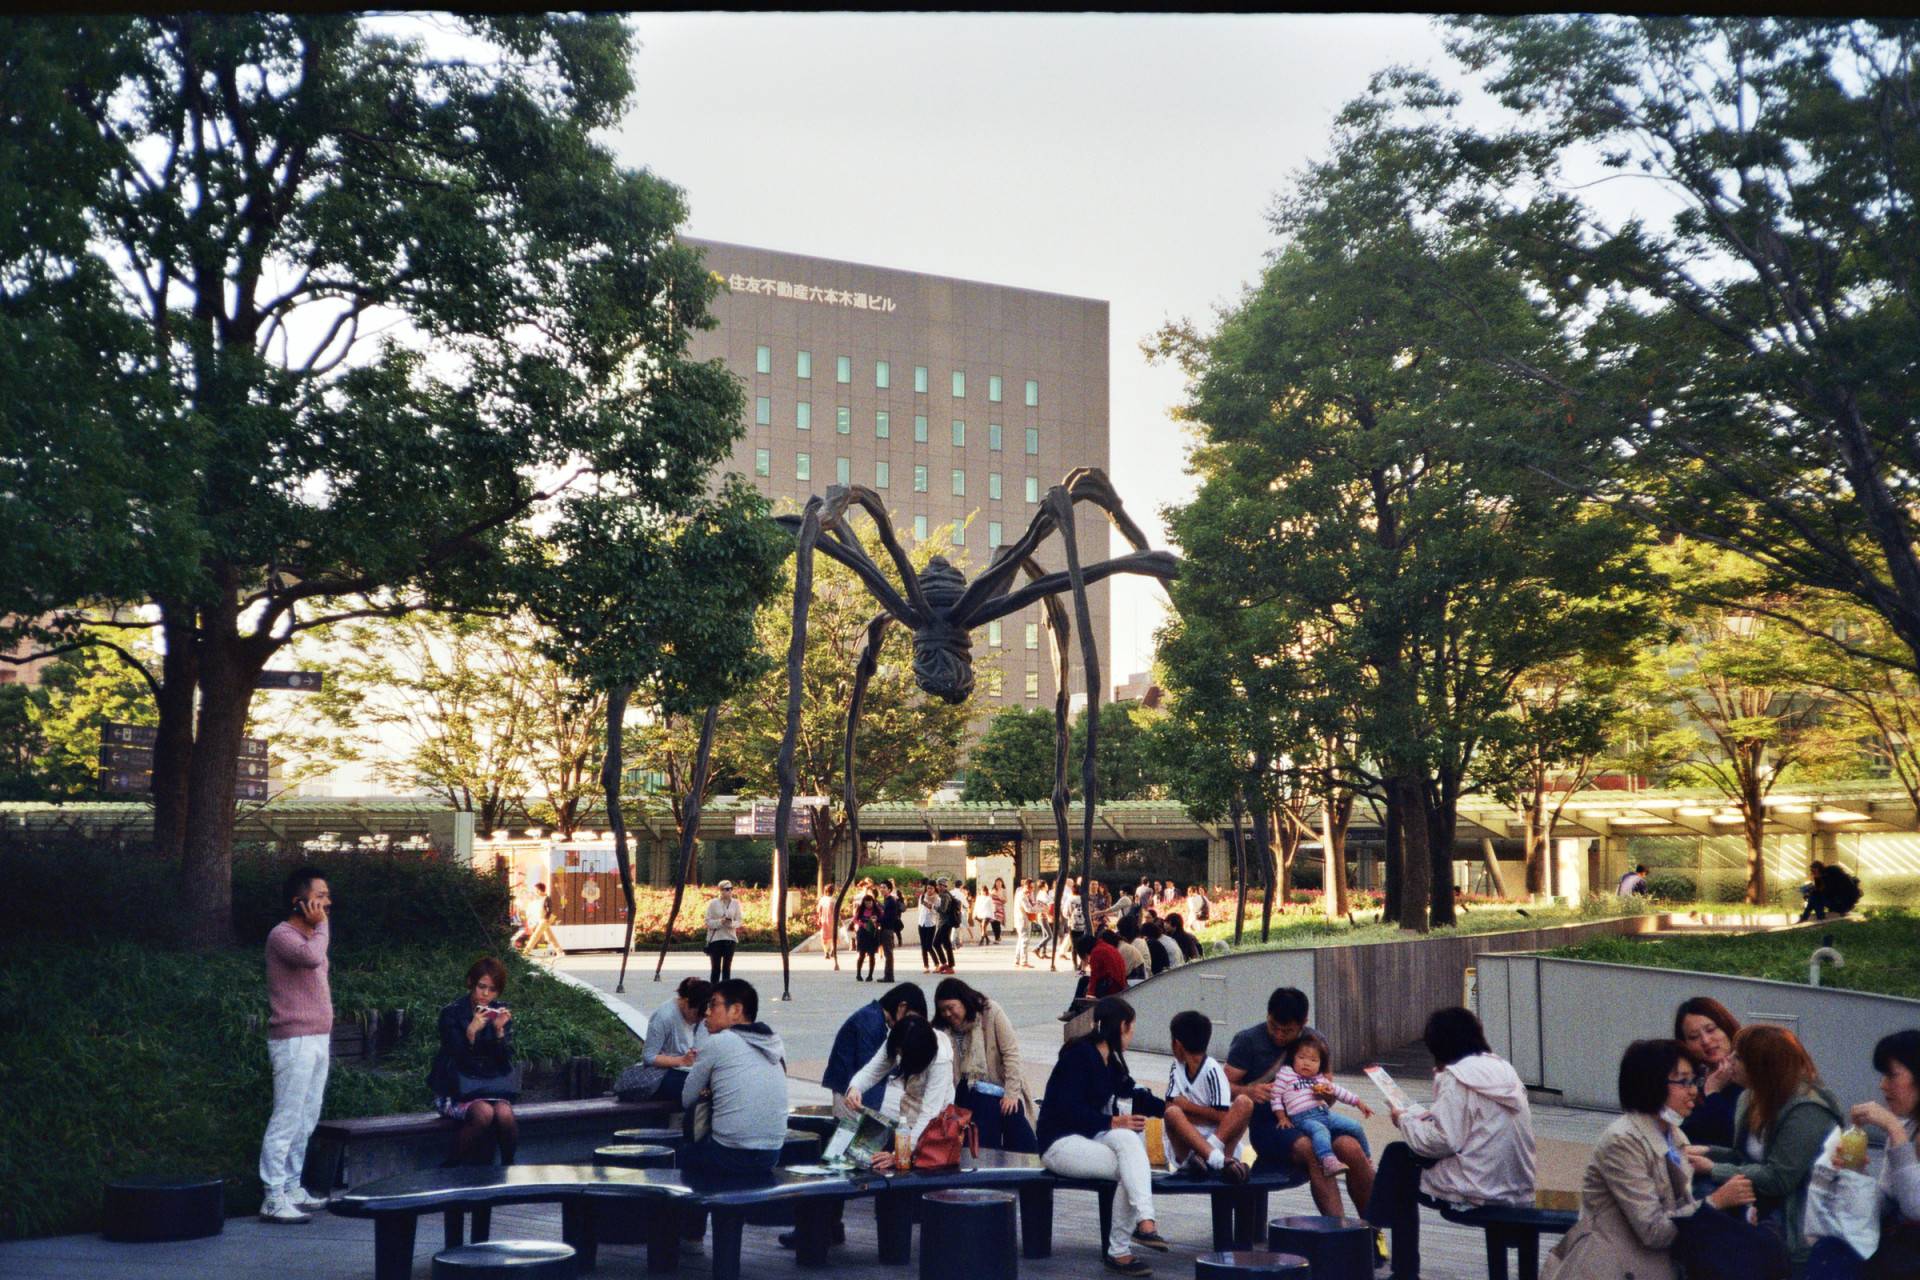 people hanging around in a park with trees on grass patches, there is large statue in the middle that resembles a spider, and a larger building on the background